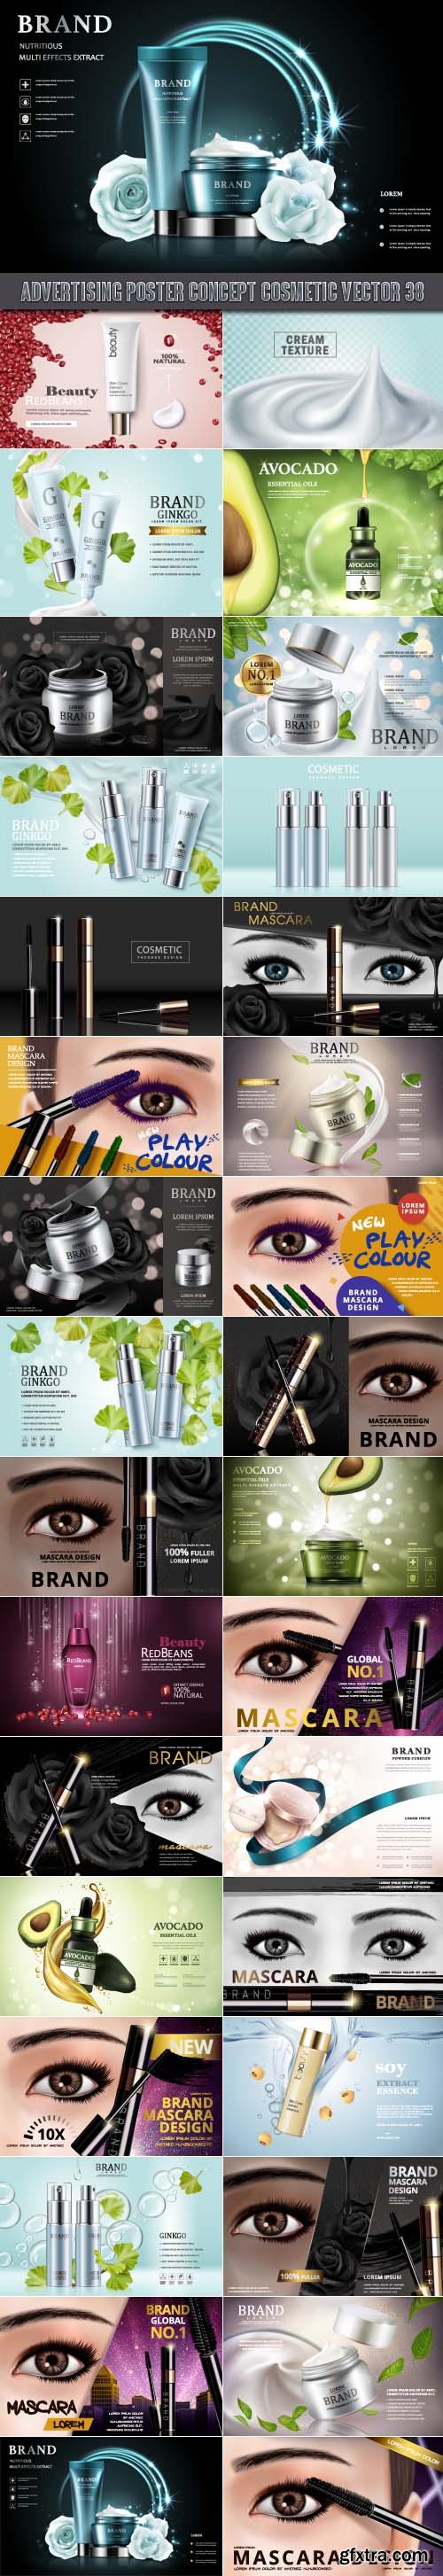 Advertising Poster Concept Cosmetic vector 38